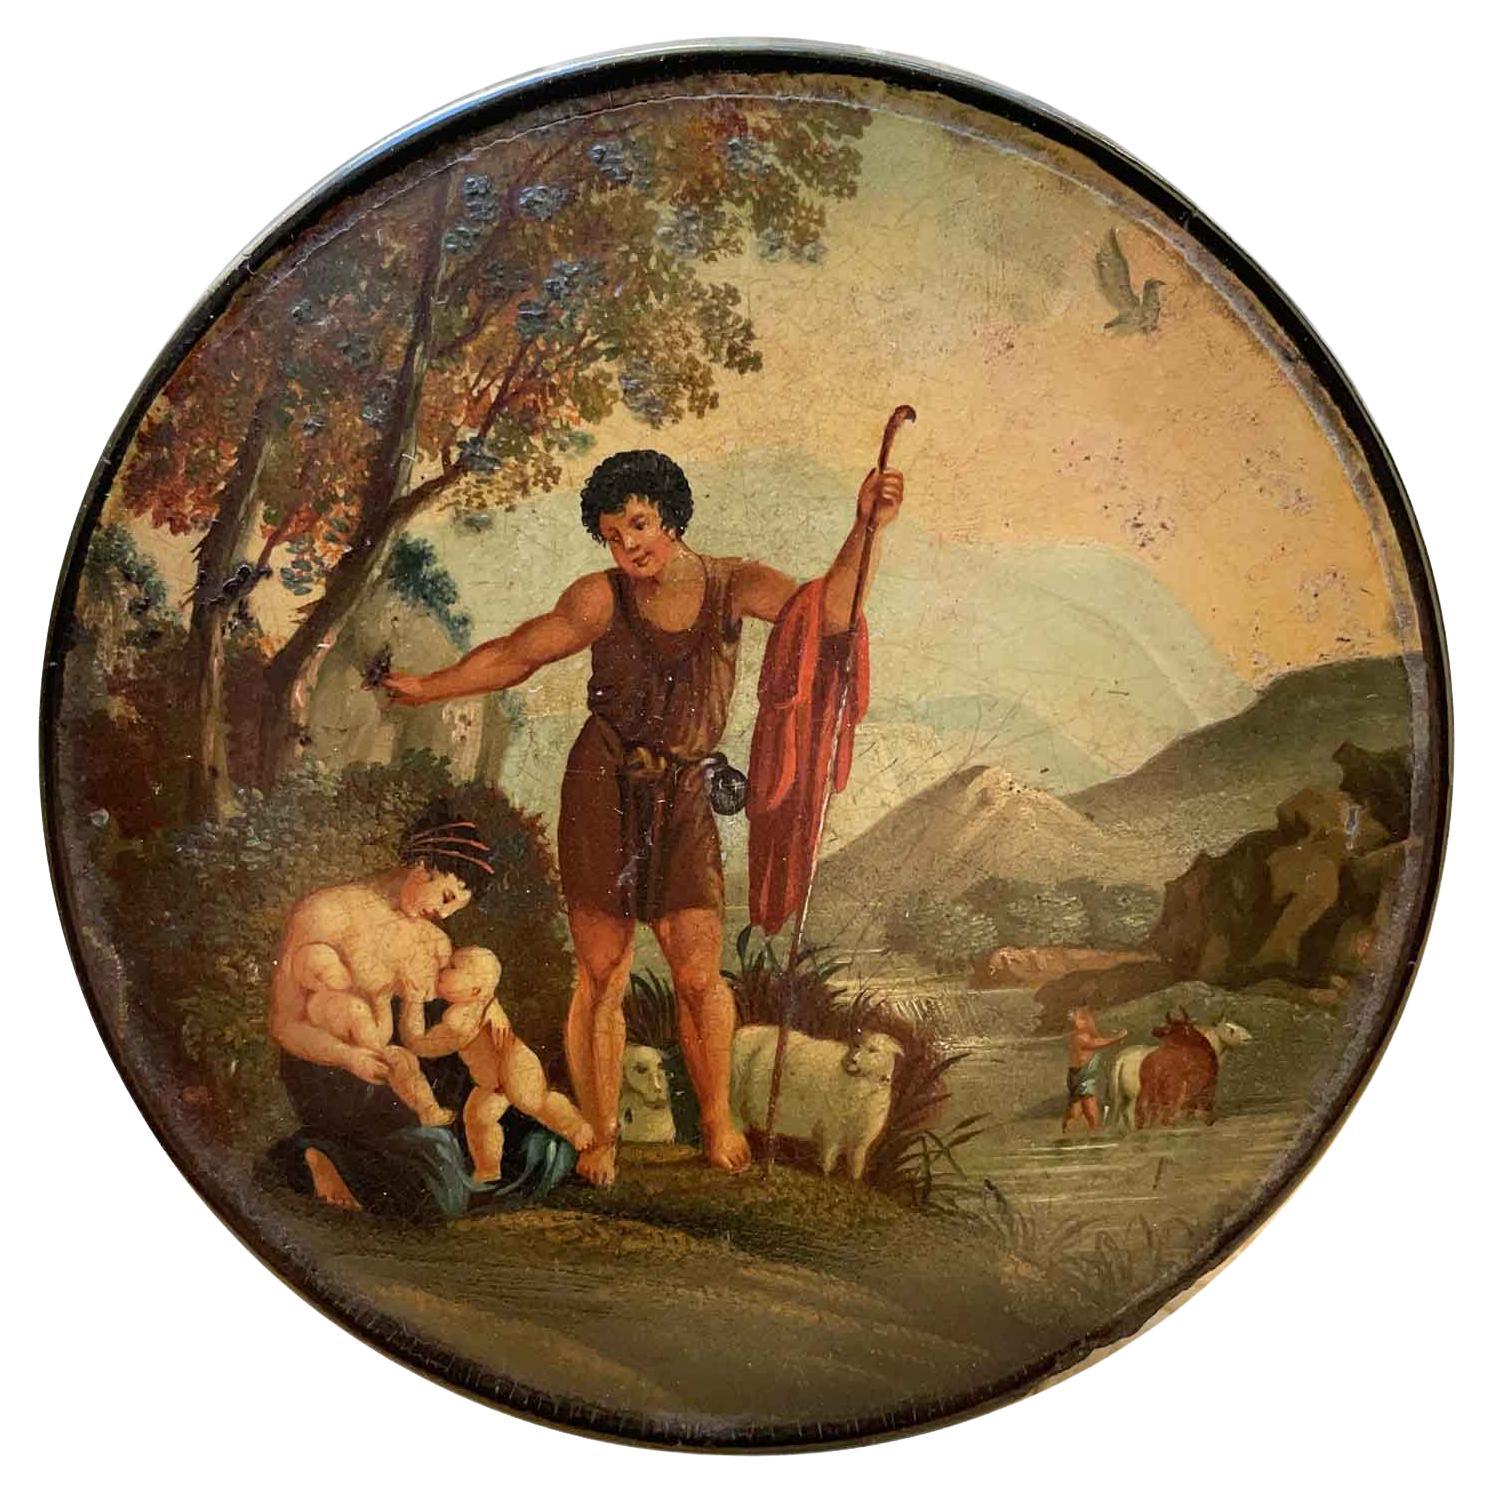 19th Century French Papier Maché Snuff Box with Landscape and Figures Painting